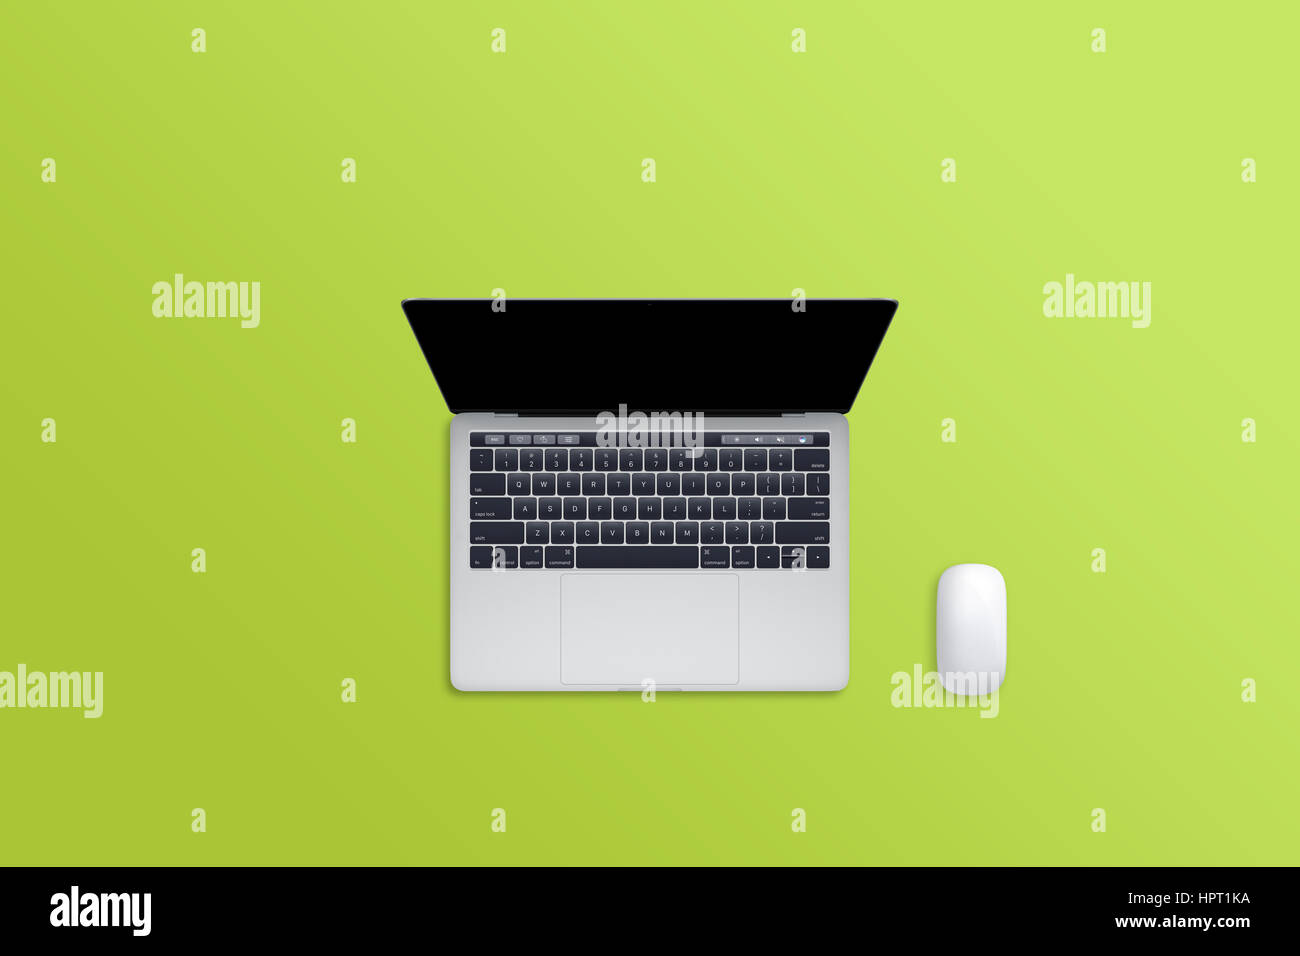 Laptop computer and mouse on green desk. Free space for text. Blank display for mockup. Stock Photo